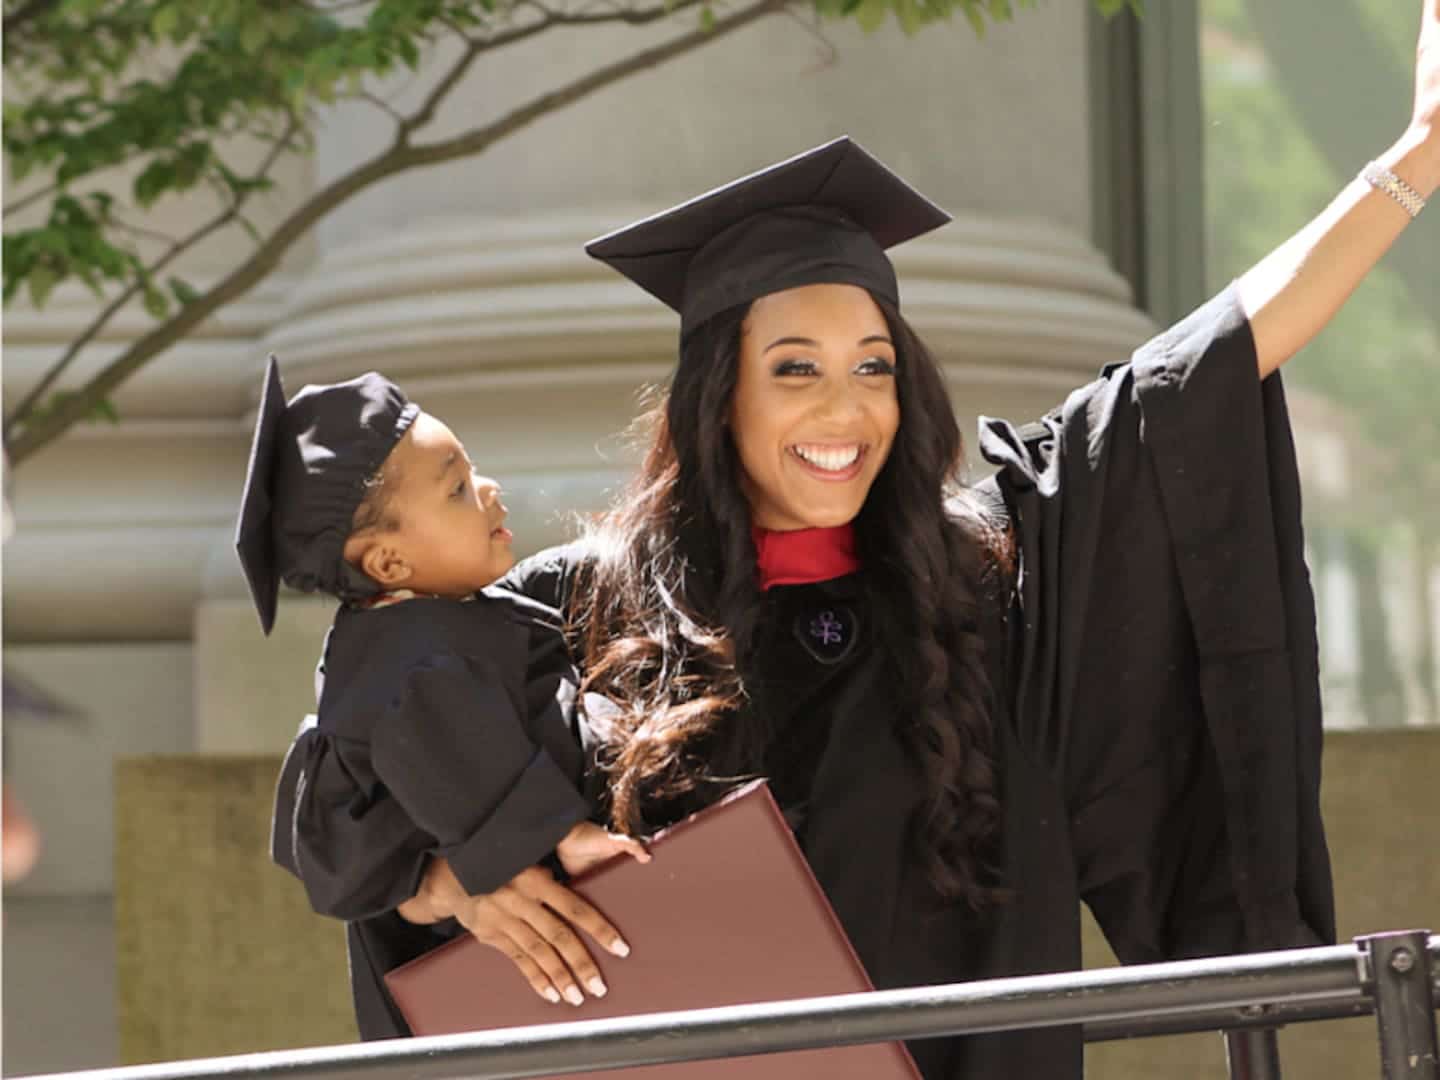 Real-Life Success Stories of Scholarships 4 Moms Recipients